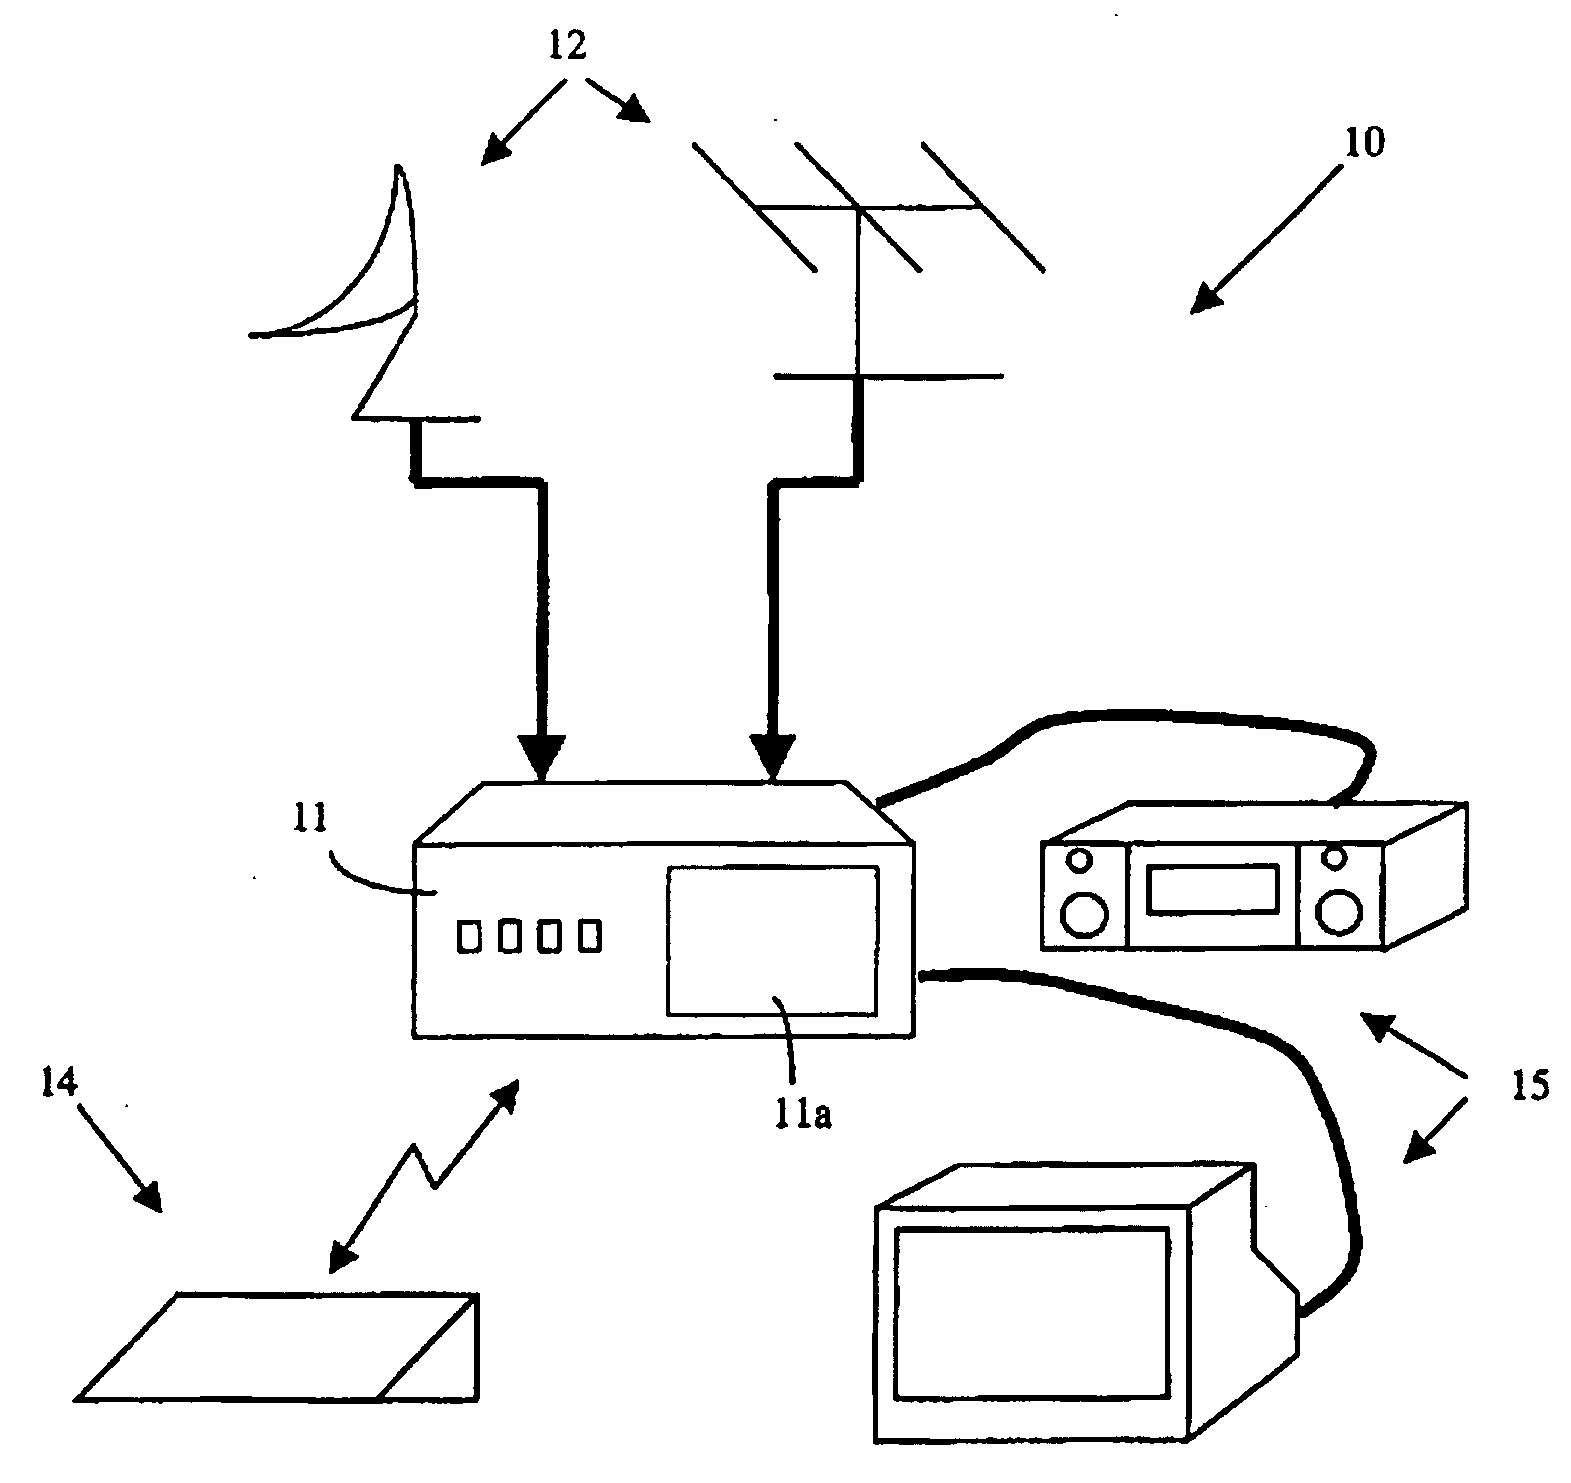 Device, system and method for programming events